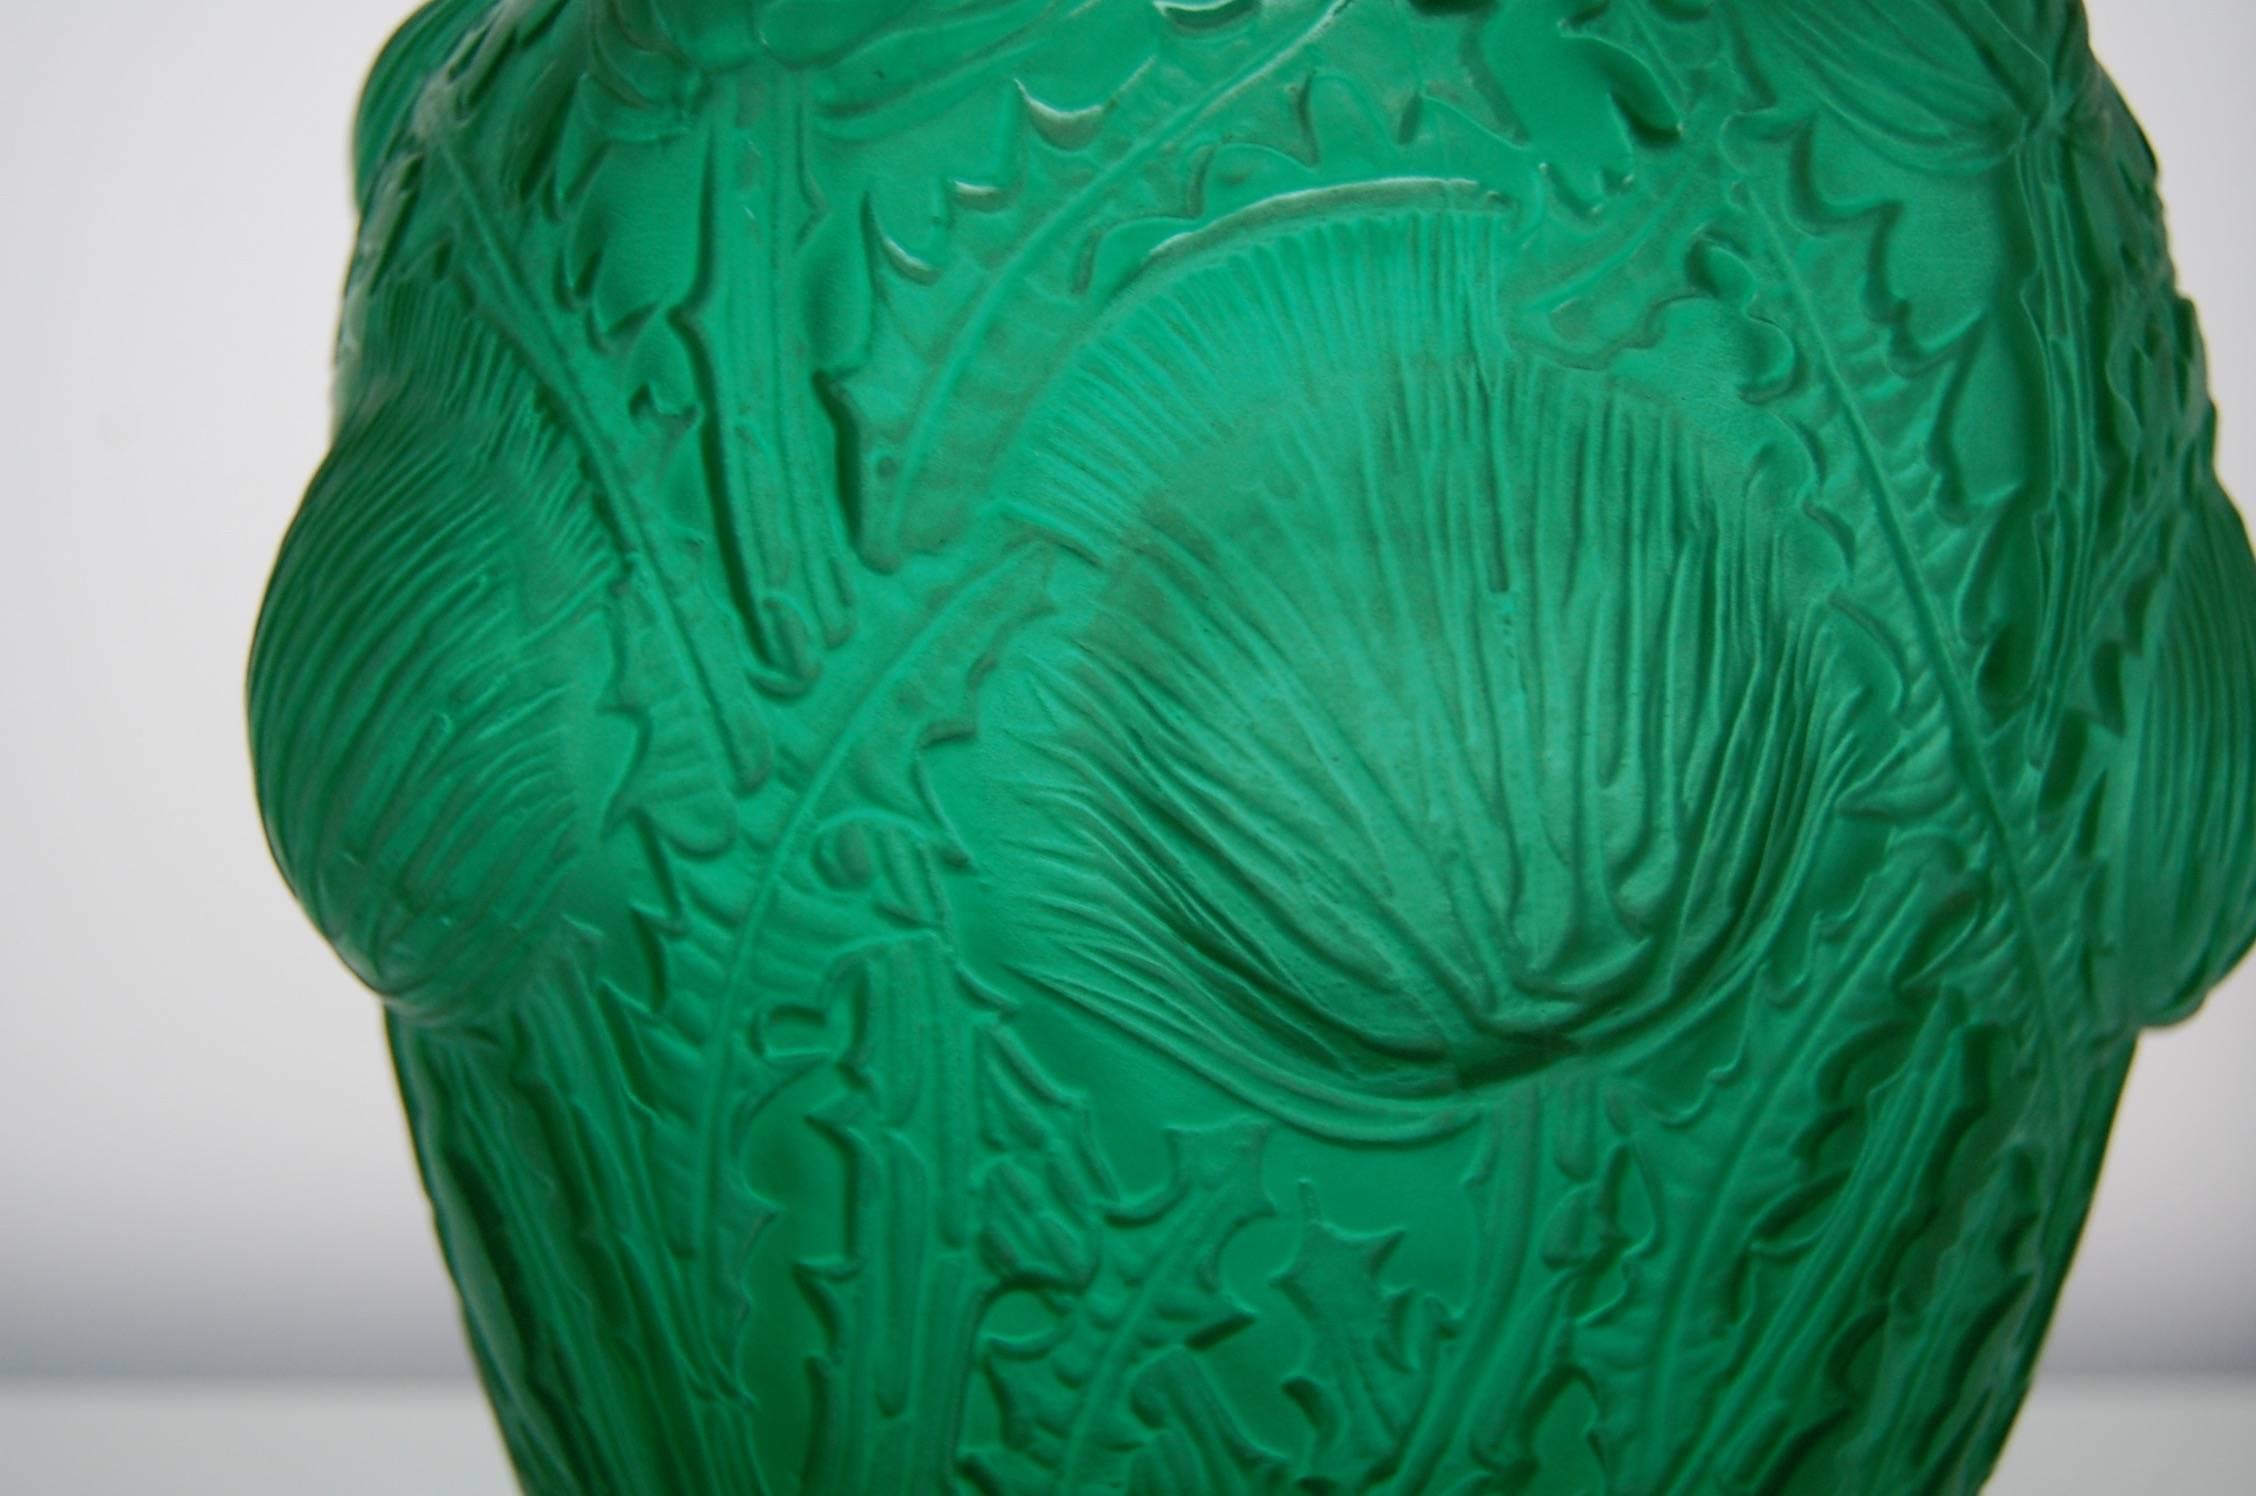 This beautiful big vase is rarely seen in this green color. The green glass makes it lively, the molding is crisp and the pattern gives the vase its majestic look. The condition is excellent, signed in script ‘R. Lalique France.’

Measures: Height